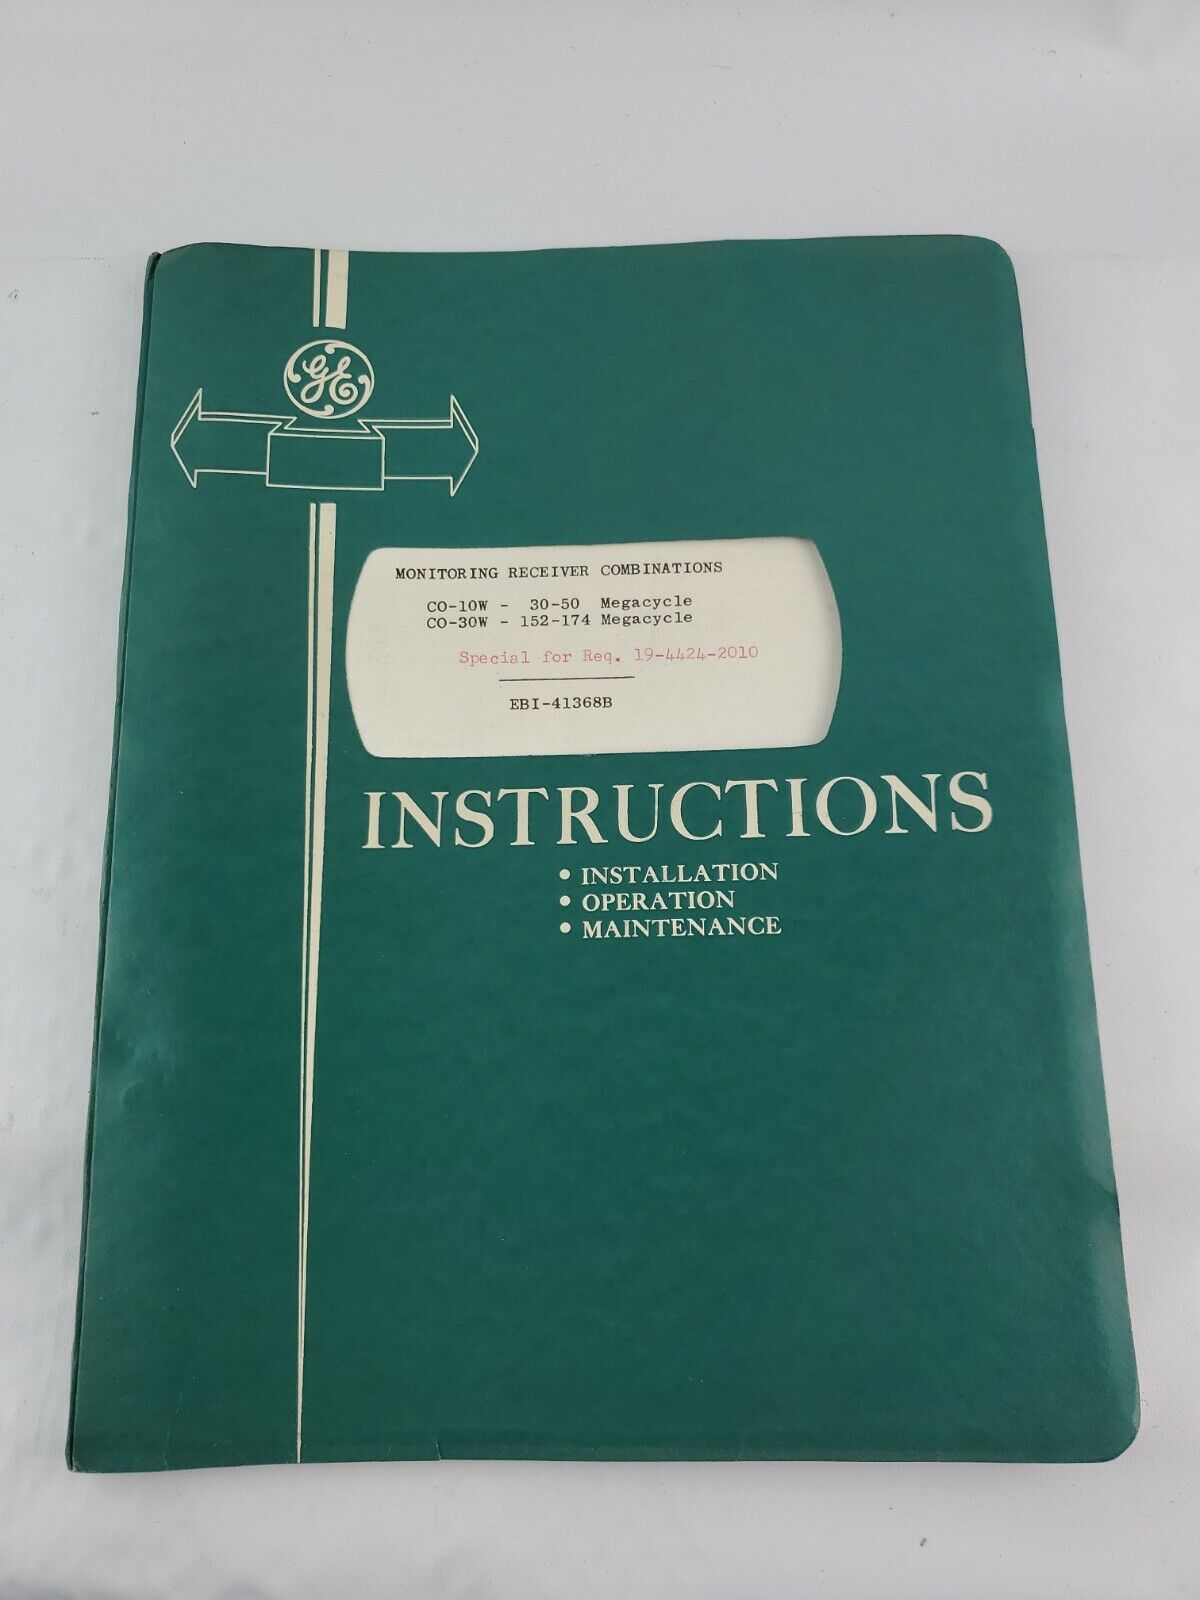 General Electric GE Monitoring Receiver CO-30W Instruction Manual 19-4424-2010